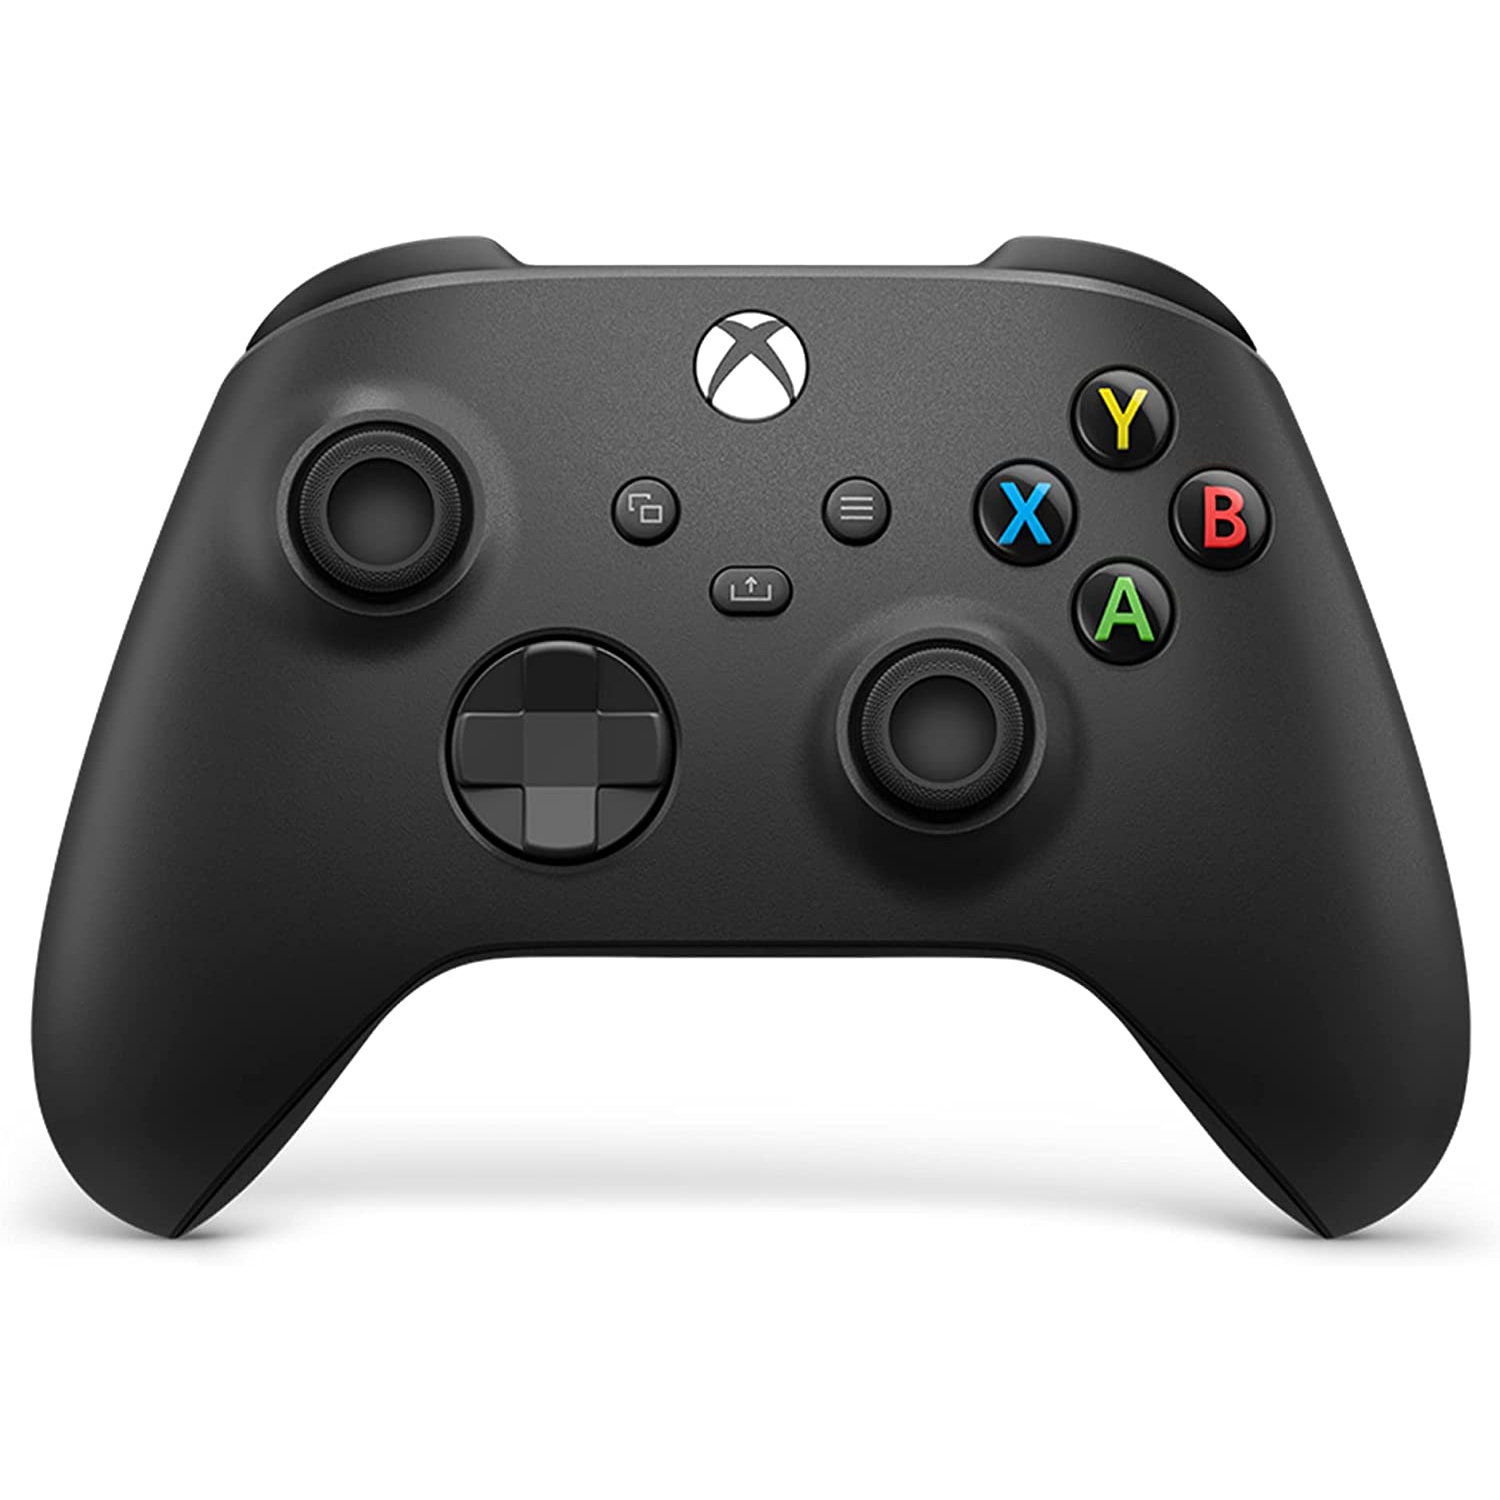 Openbox Xbox Wireless Controller for Xbox Series X|S, Xbox One, and Windows Devices – Carbon Black